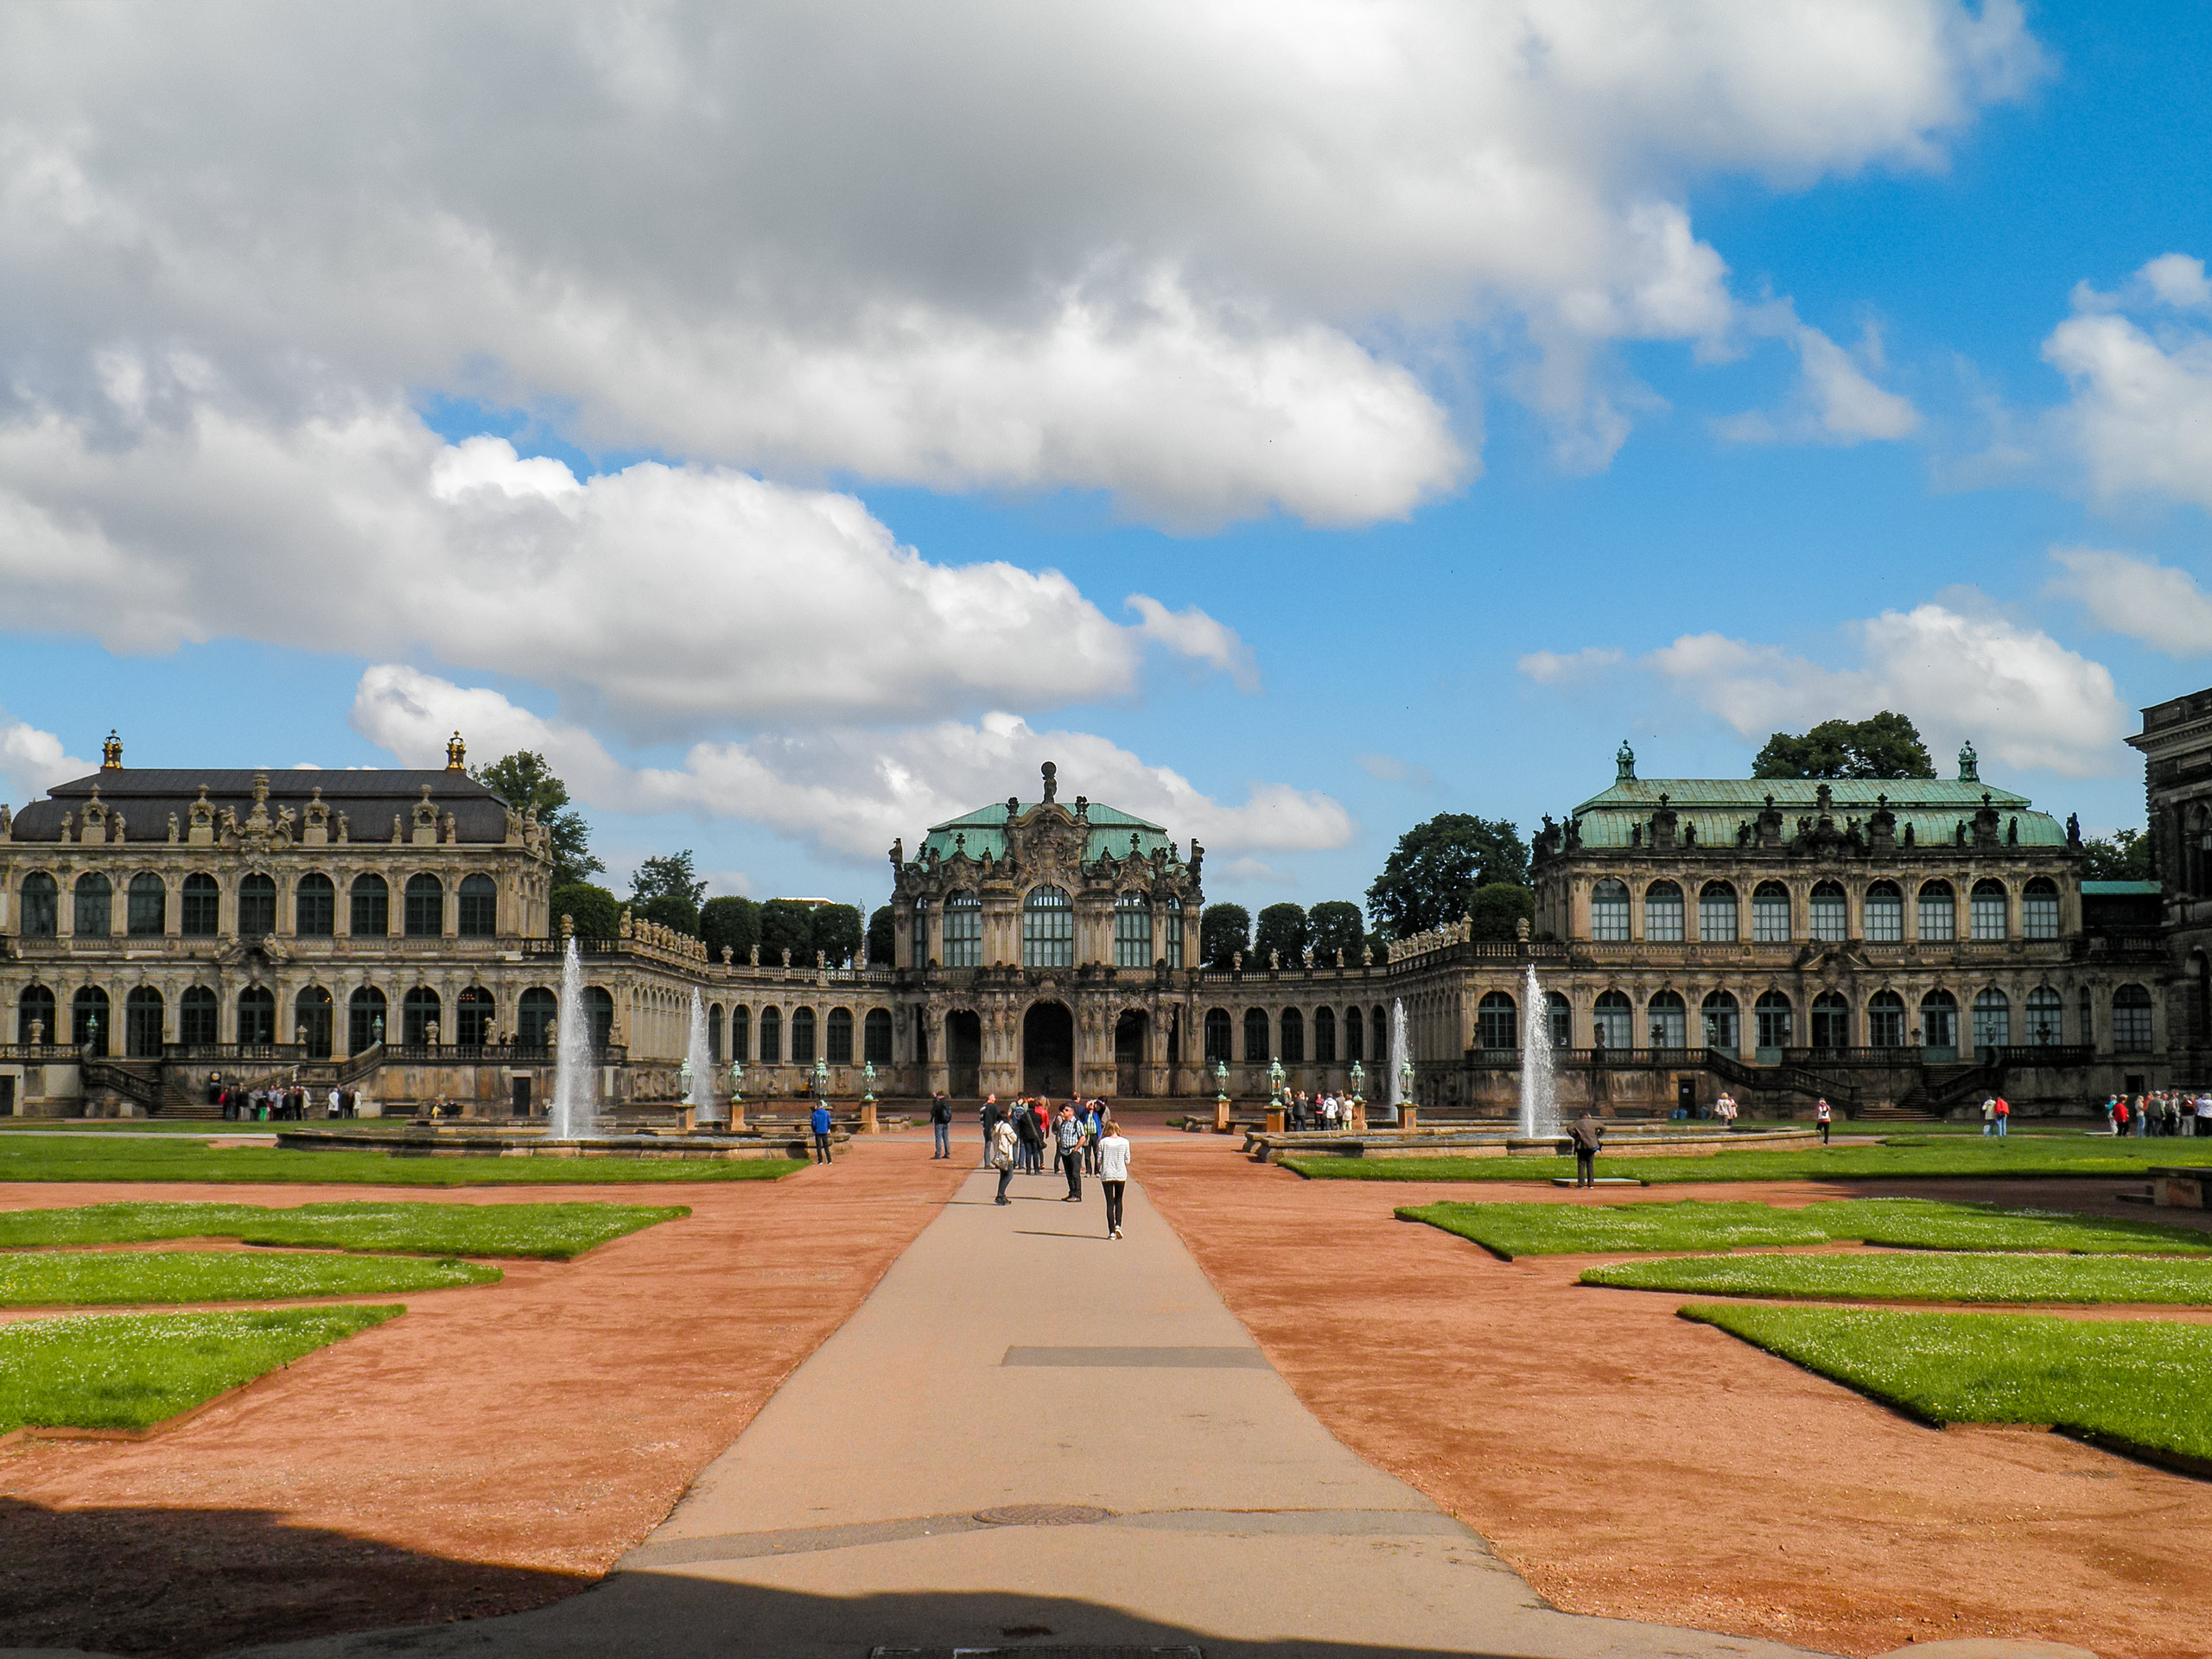 Zwinger palace in Dresden